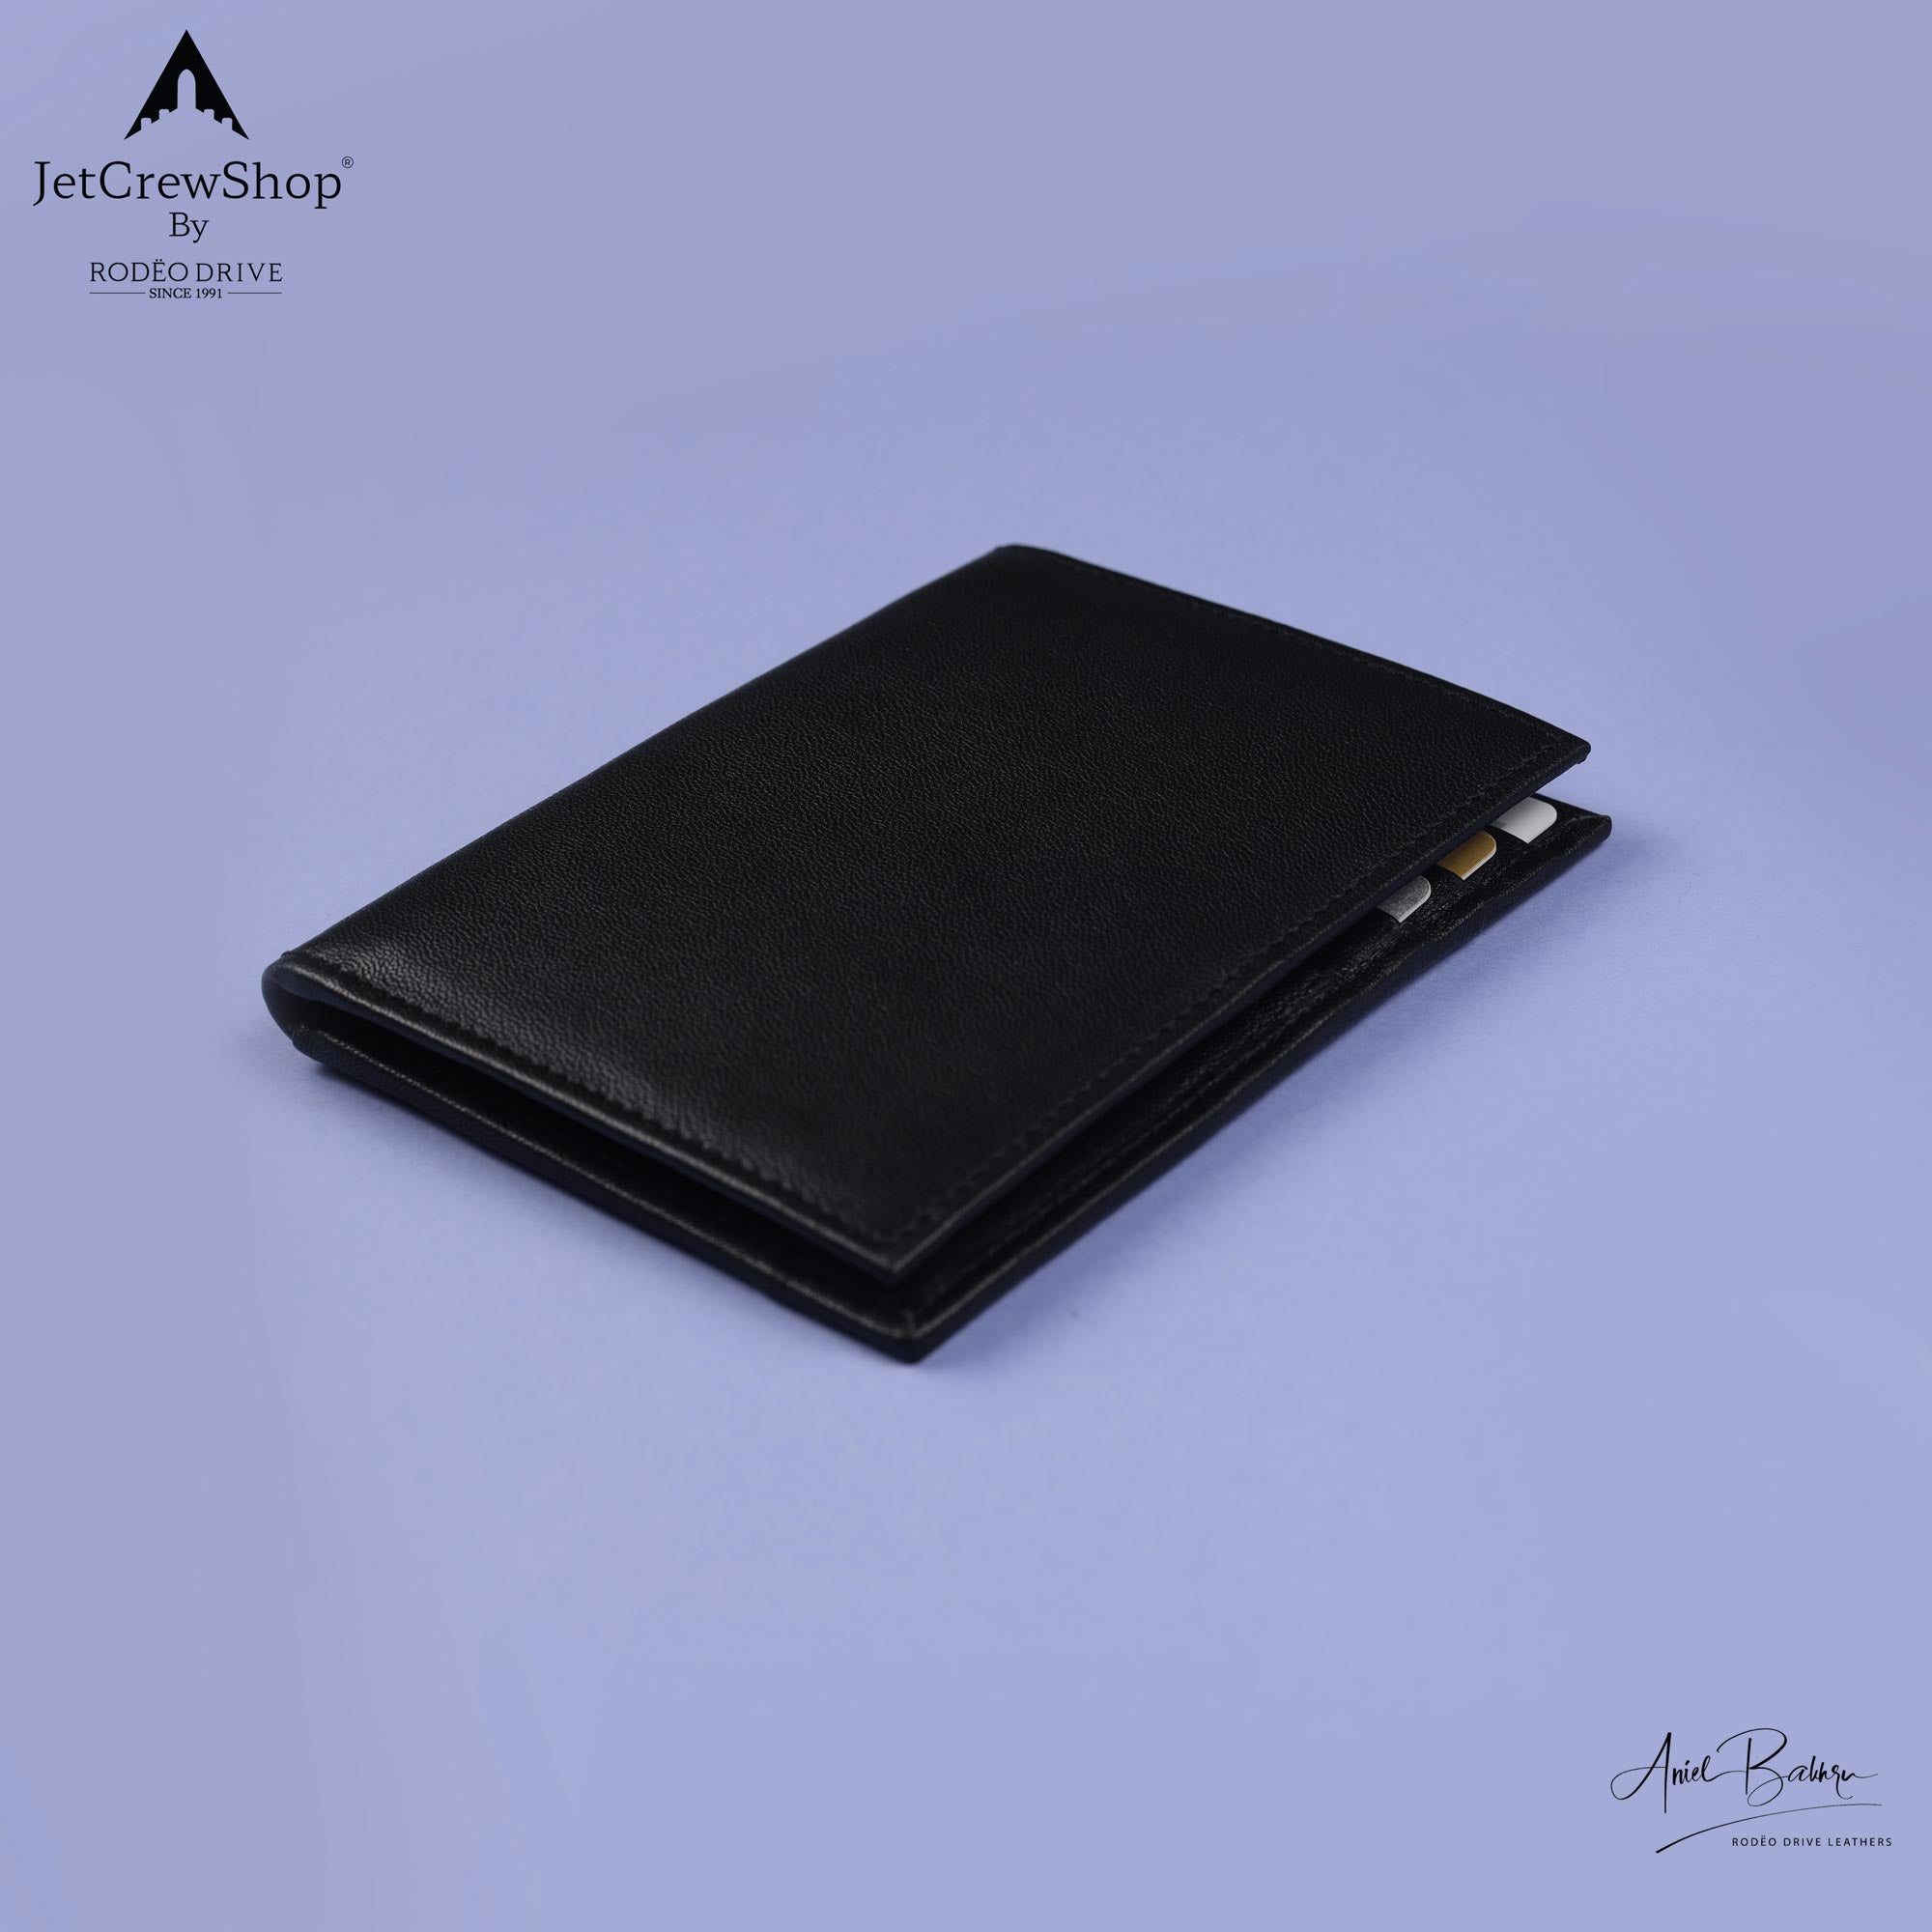 closed look of our pilot document holder